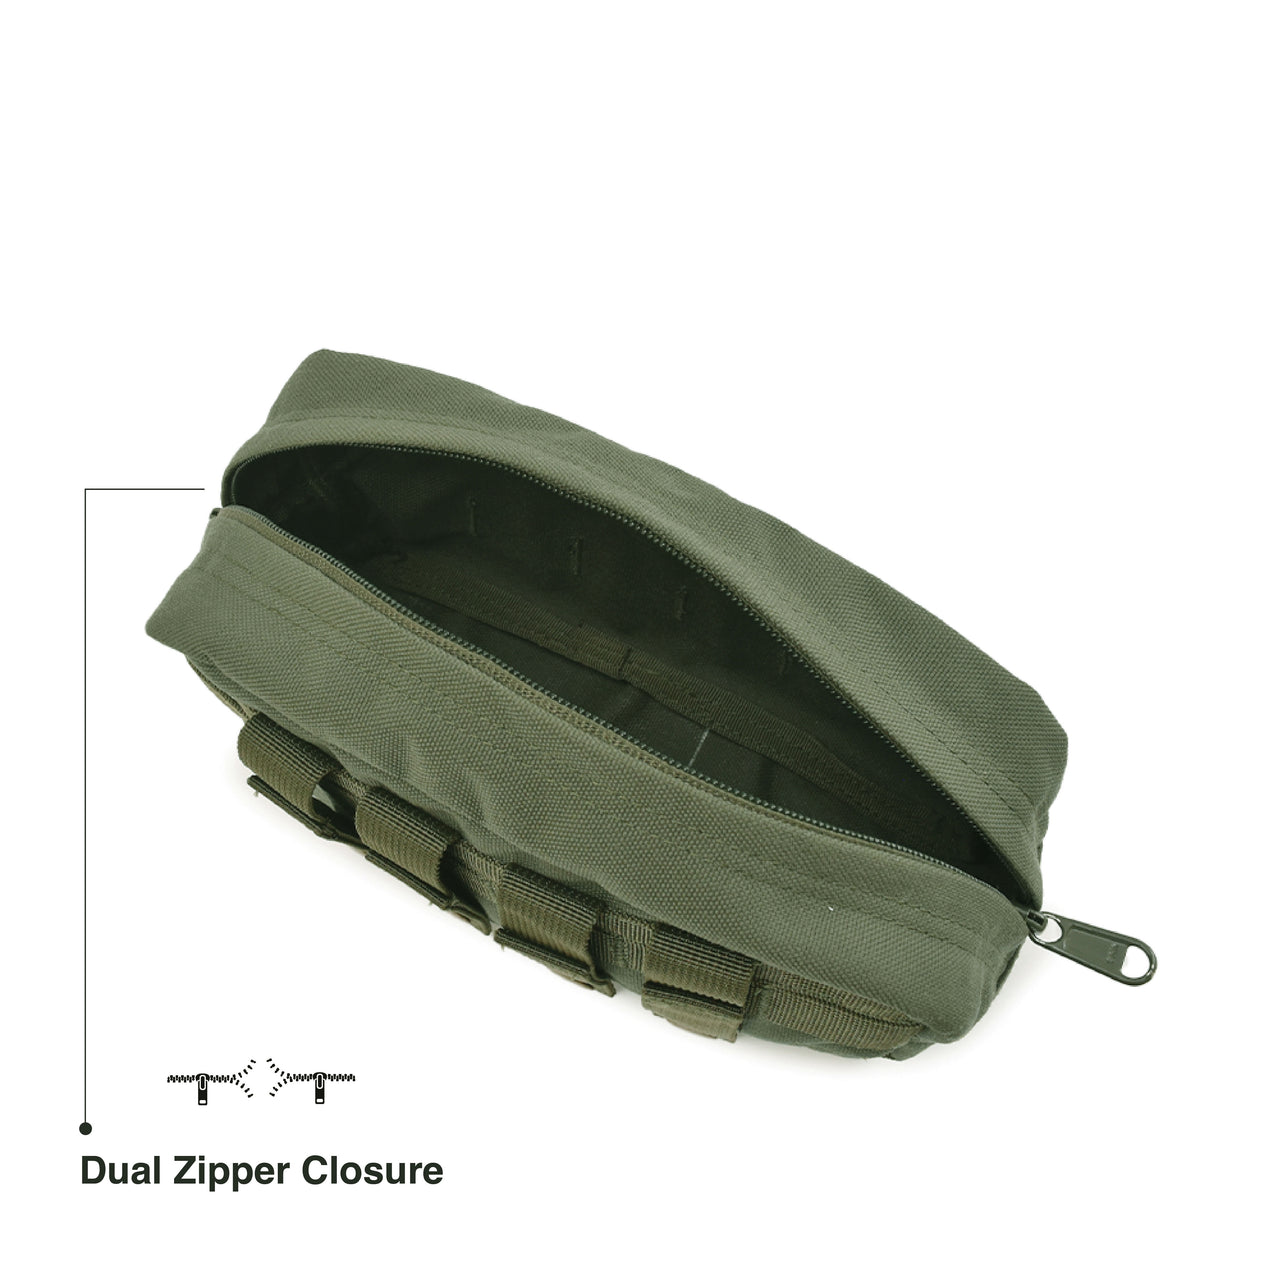 8 x 5 Molle Utility Pouch - Olive Green